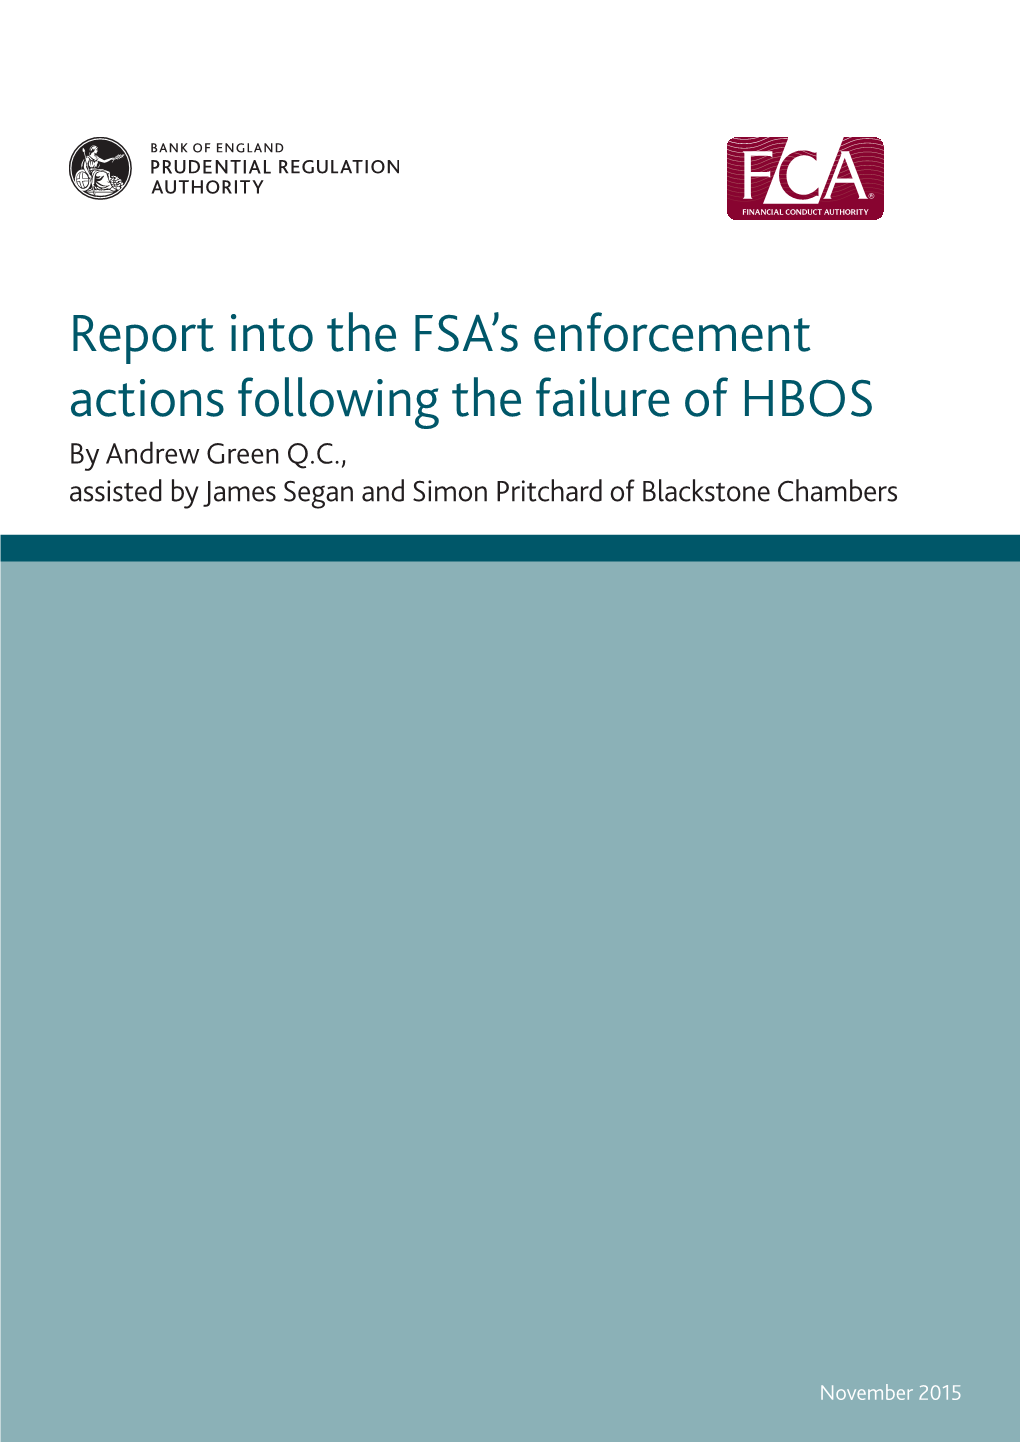 Report Into the FSA's Enforcement Actions Following the Failure of HBOS